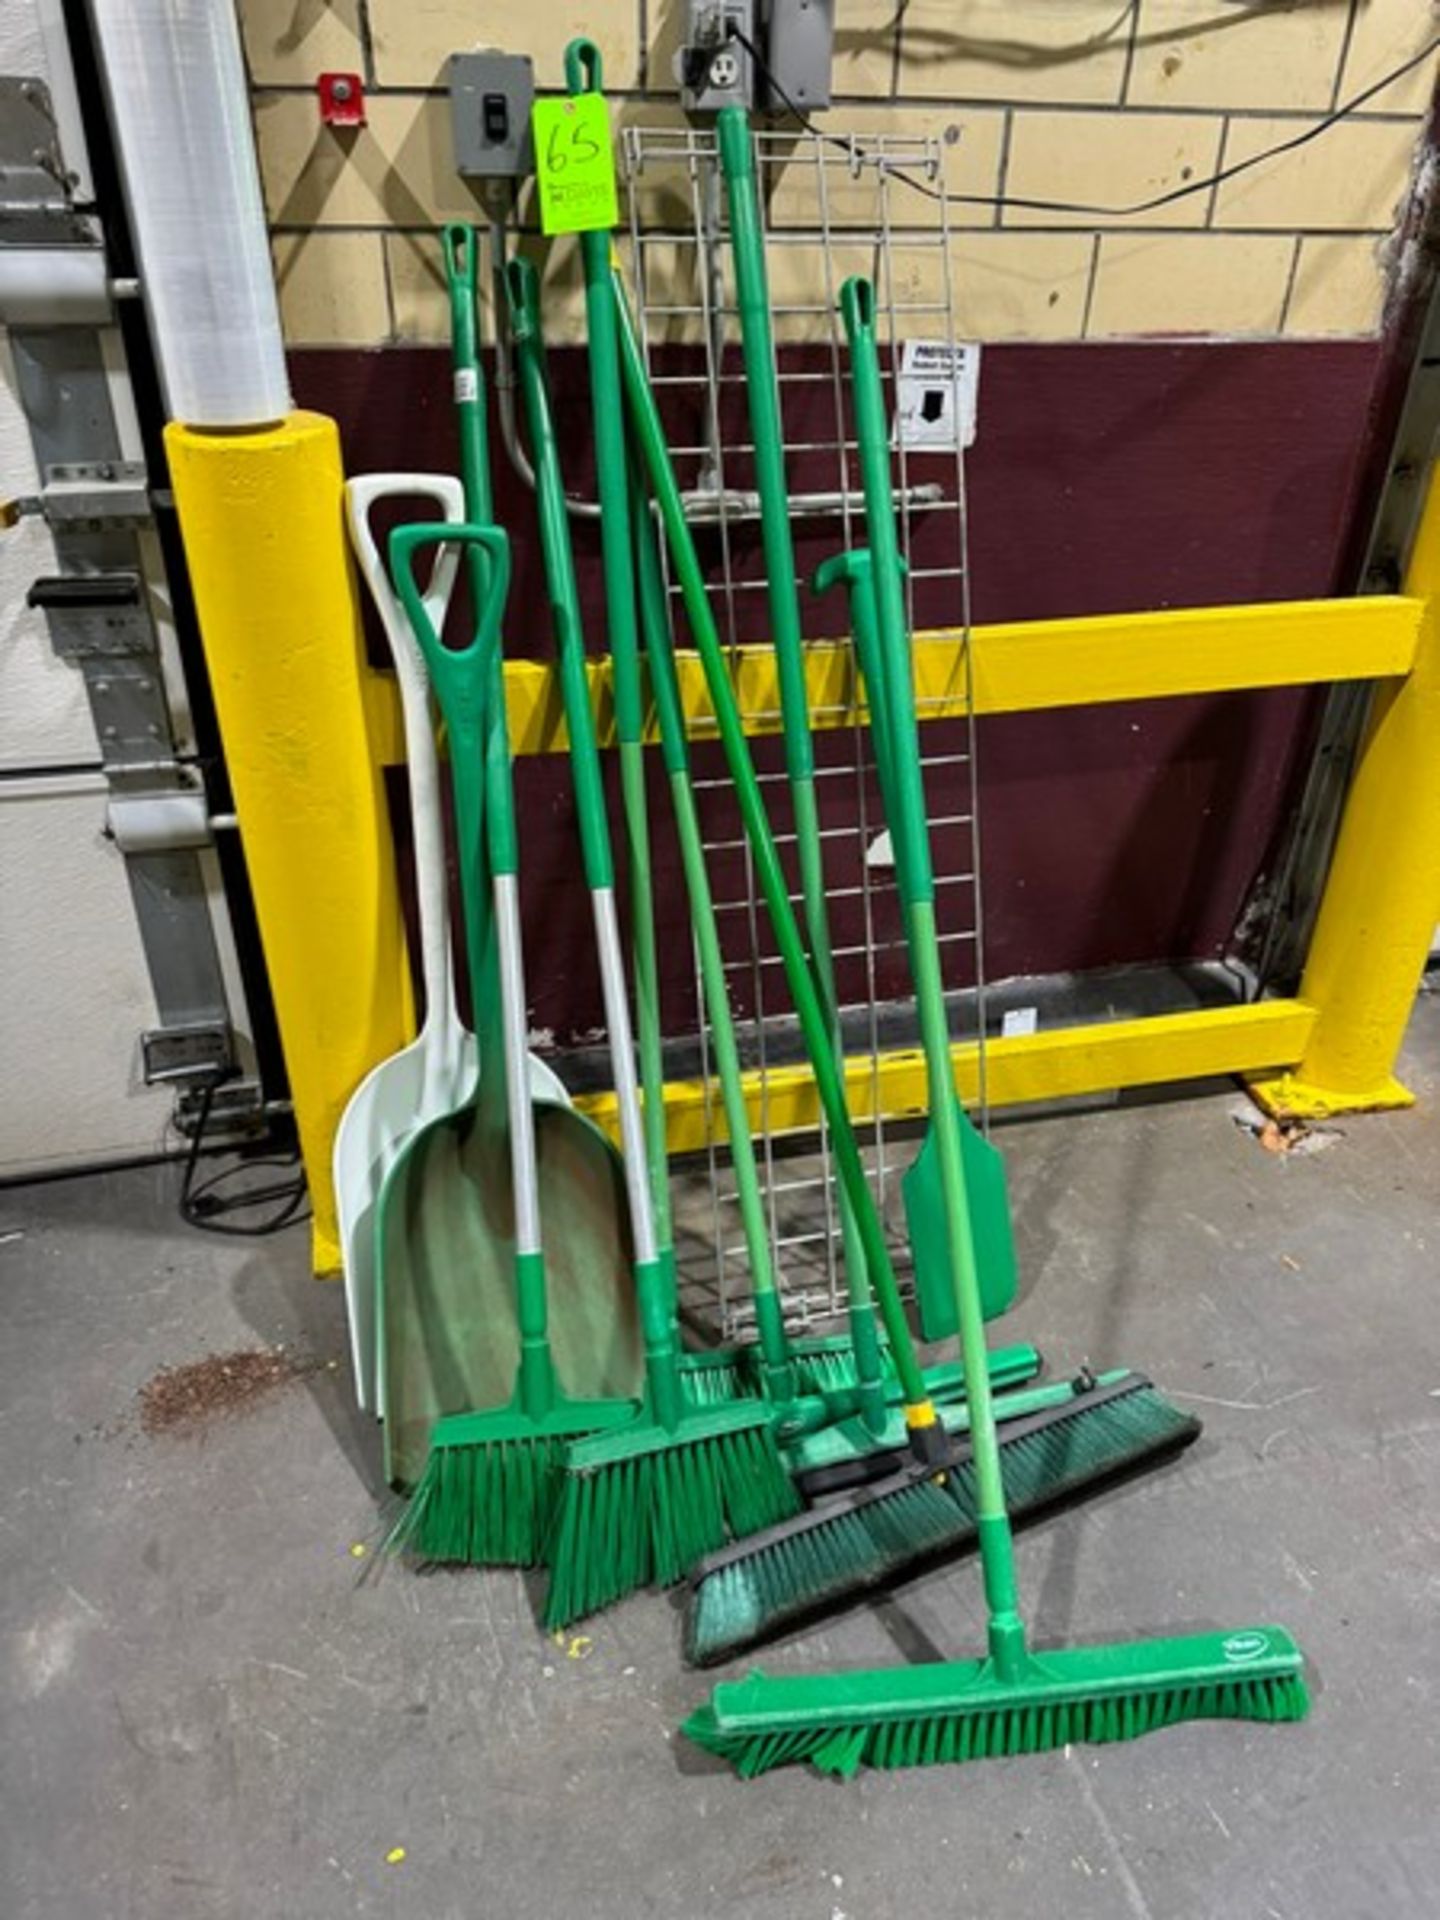 Lot of Assorted Brooms, Brushes, & Shovels